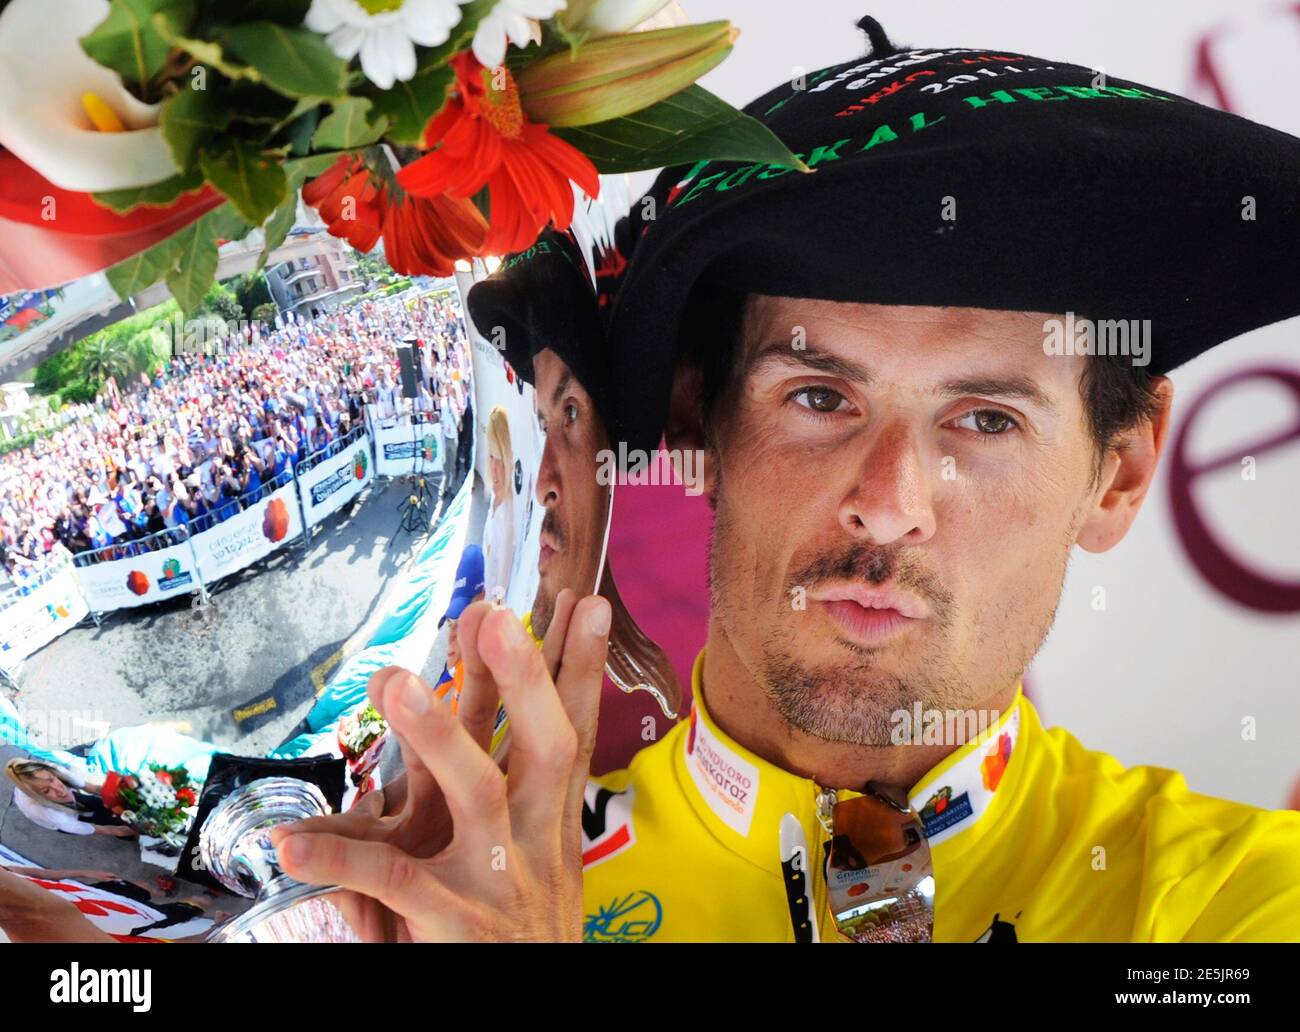 radioshack-rider-andreas-kloden-of-germany-celebrates-on-the-podium-after-winning-the-six-day-tour-of-the-basque-country-cycling-race-in-zalla-april-9-2011-kloden-won-the-uci-world-tour-event-with-an-47-second-lead-over-second-placed-radioshack-rider-christopher-horner-of-the-us-and-third-placed-rabobank-rider-robert-gesink-of-the-netherlands-reutersvincent-west-spain-tags-sport-cycling-2E5JR69.jpg